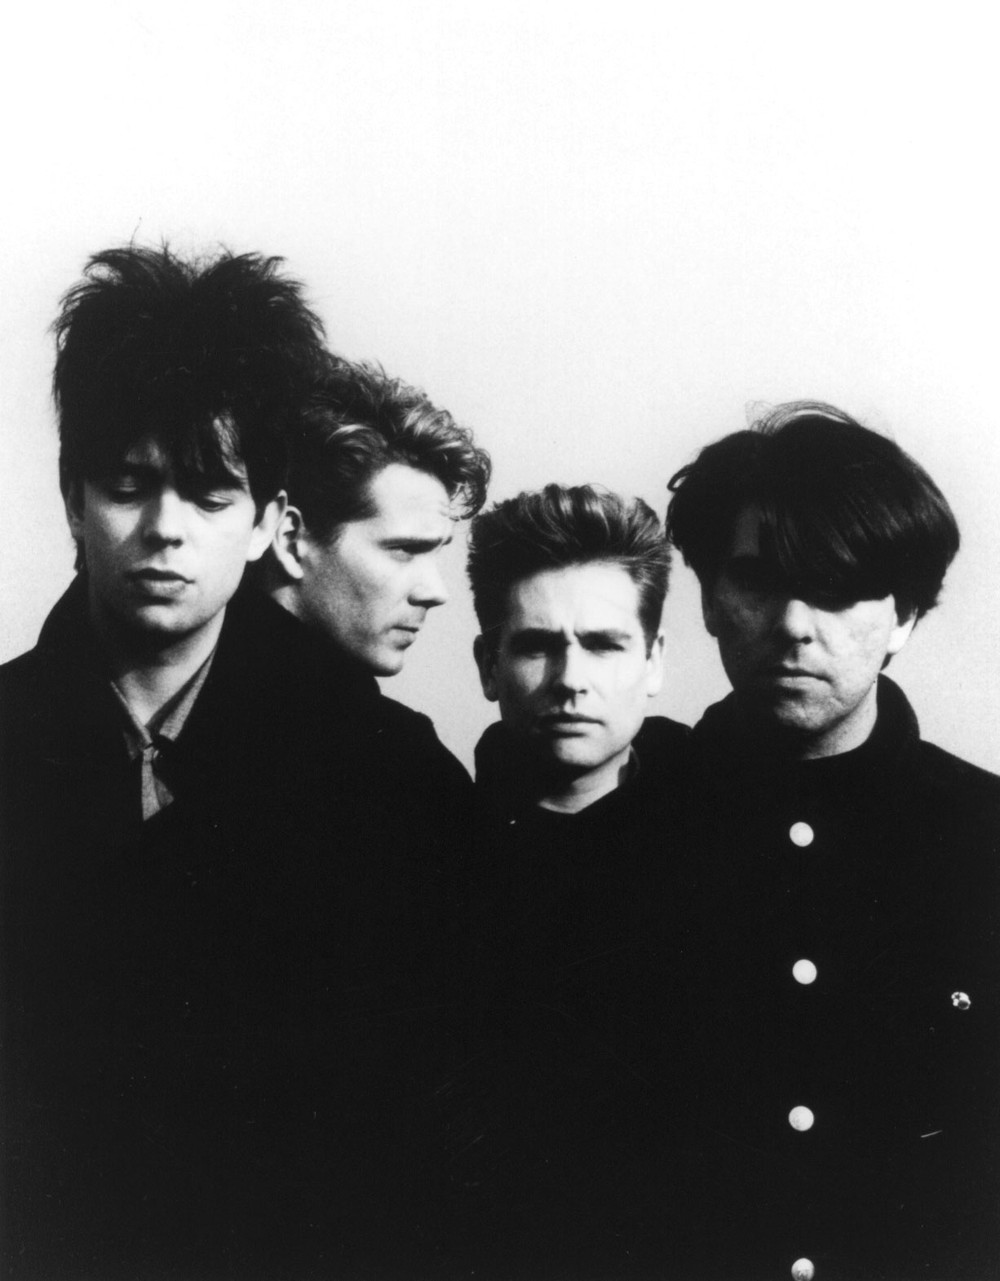 Echo and The Bunnymen: Songs To Learn - Sing at History Tickets